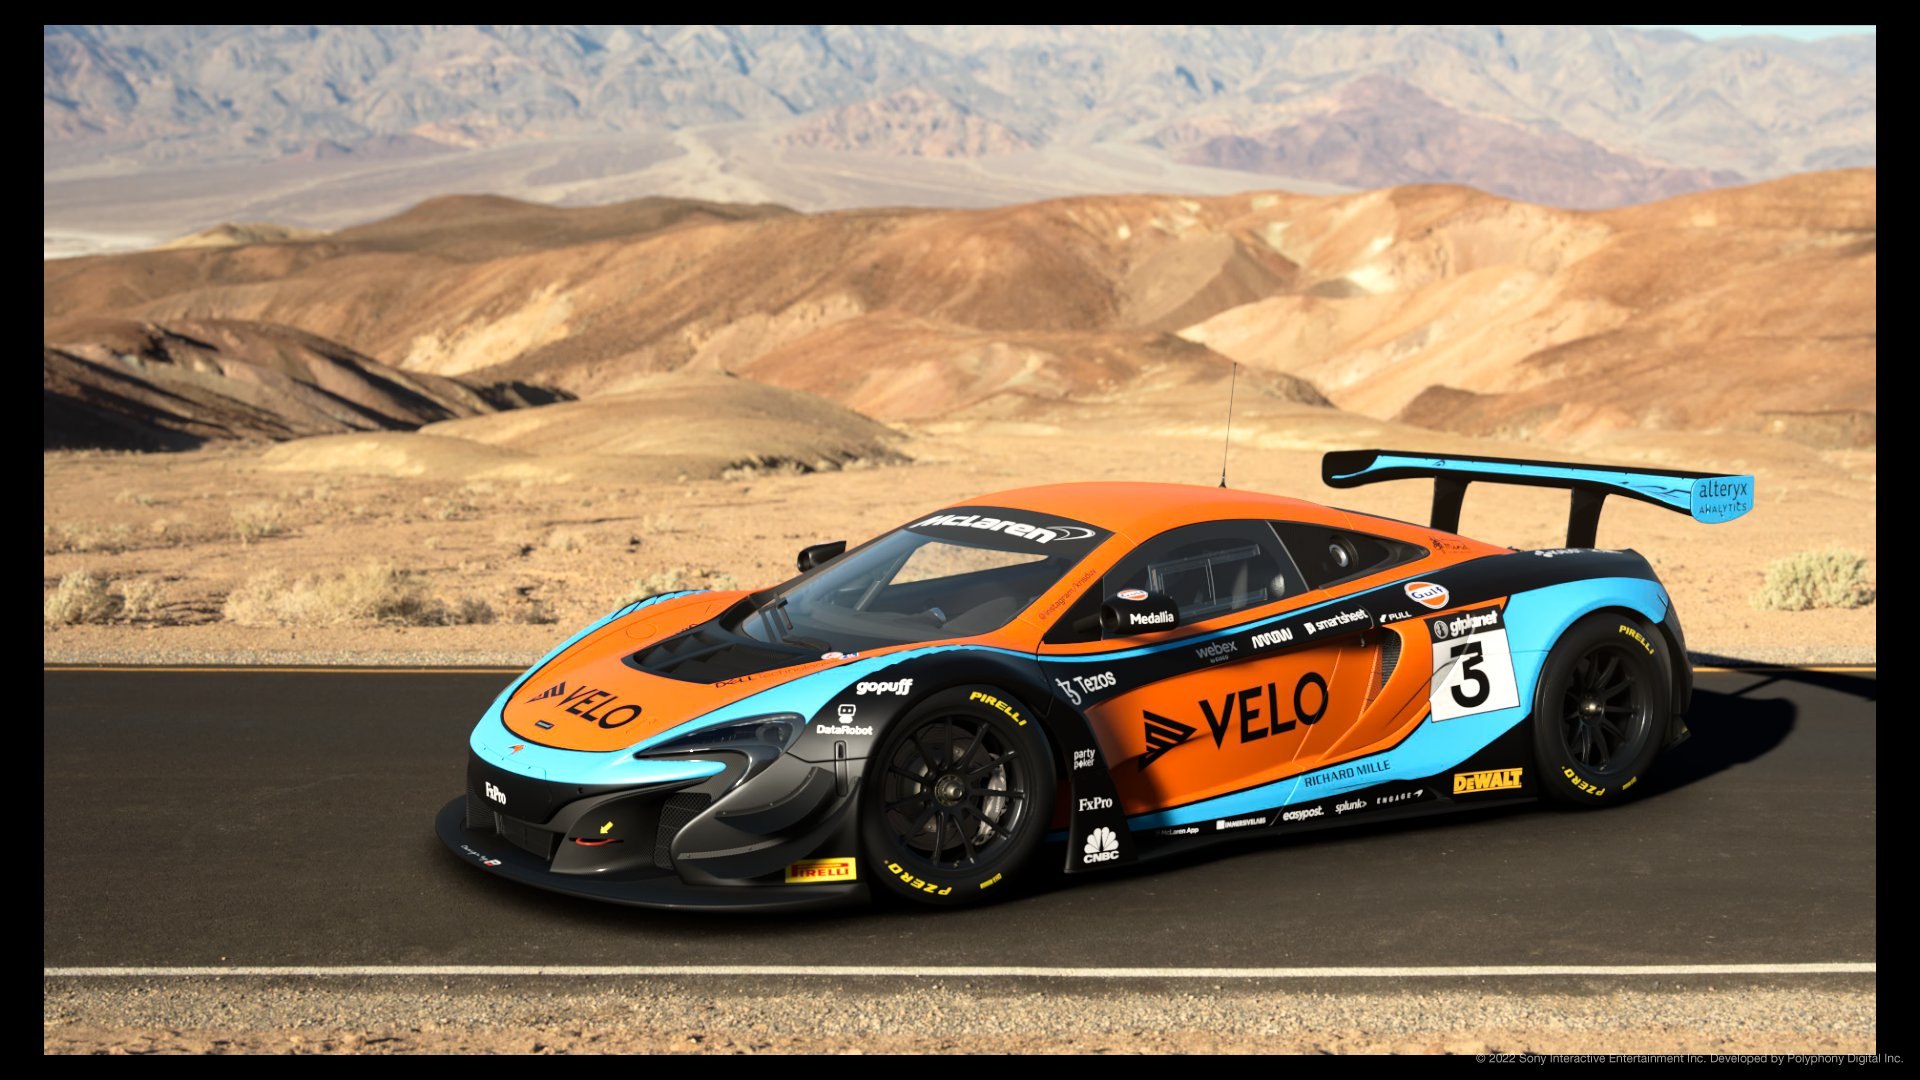 650S based on McLaren MCL36